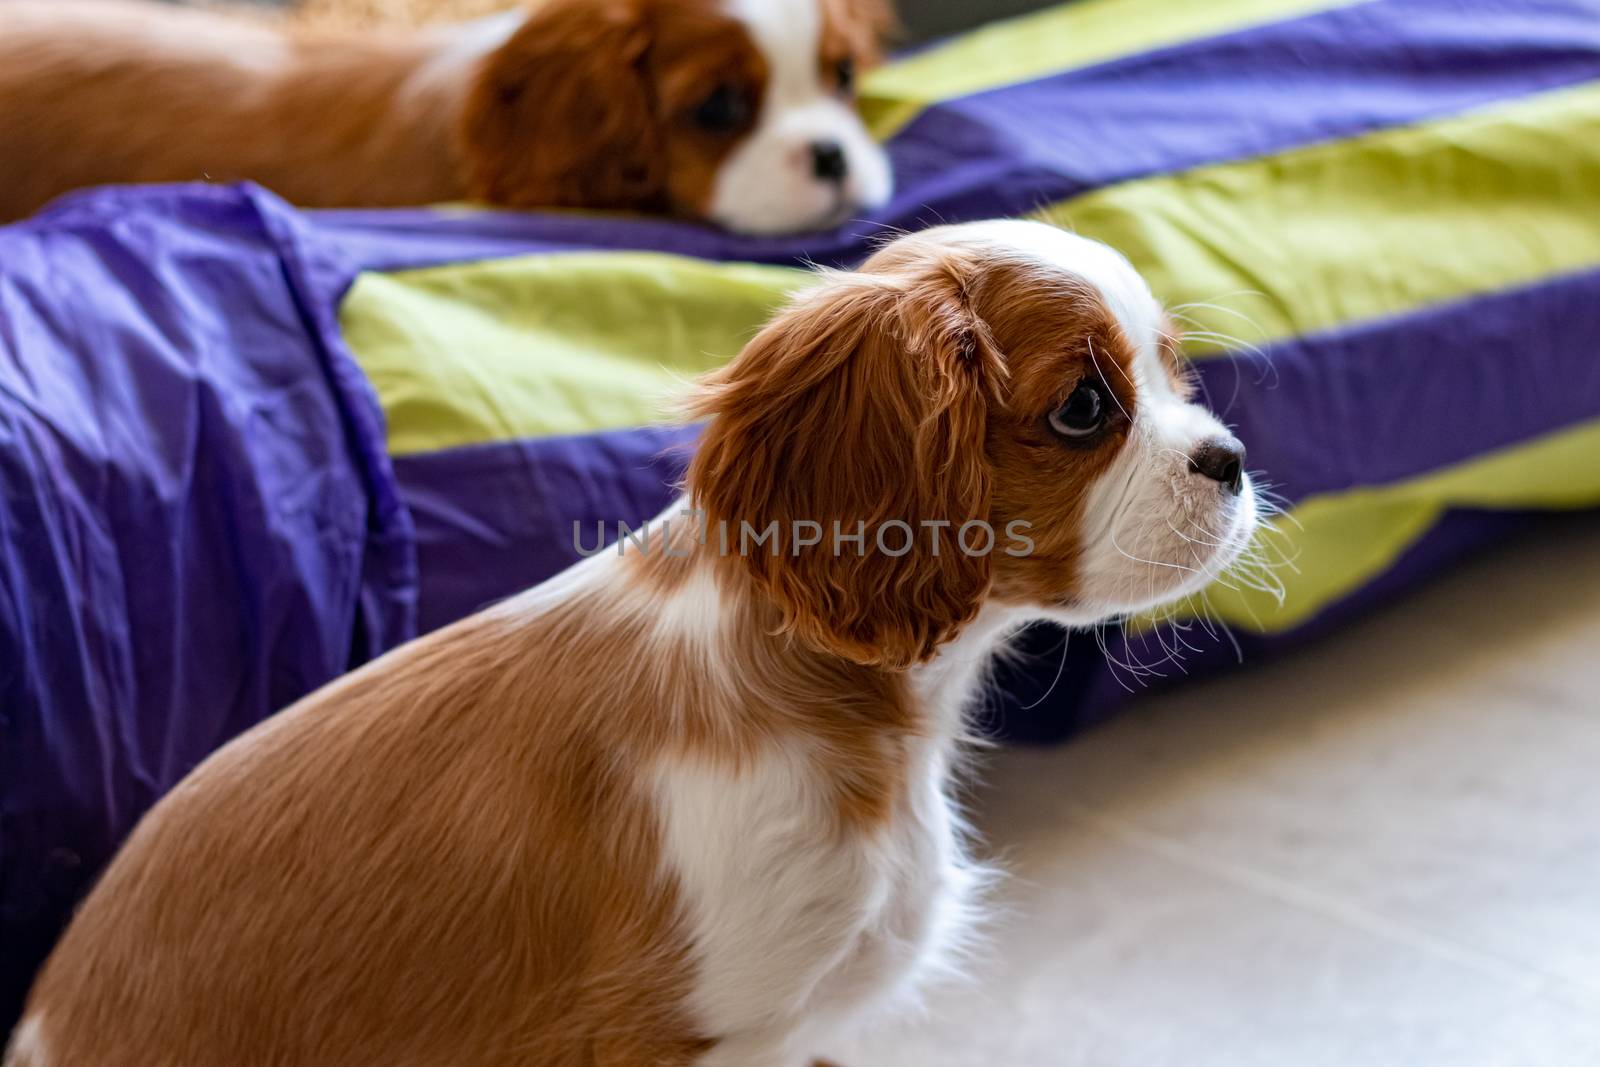 Two Cavalier King Charles Spaniel puppies are on a hardwood floor, with one sitting in the foreground, and another resting its head on a play tunnel in the background.